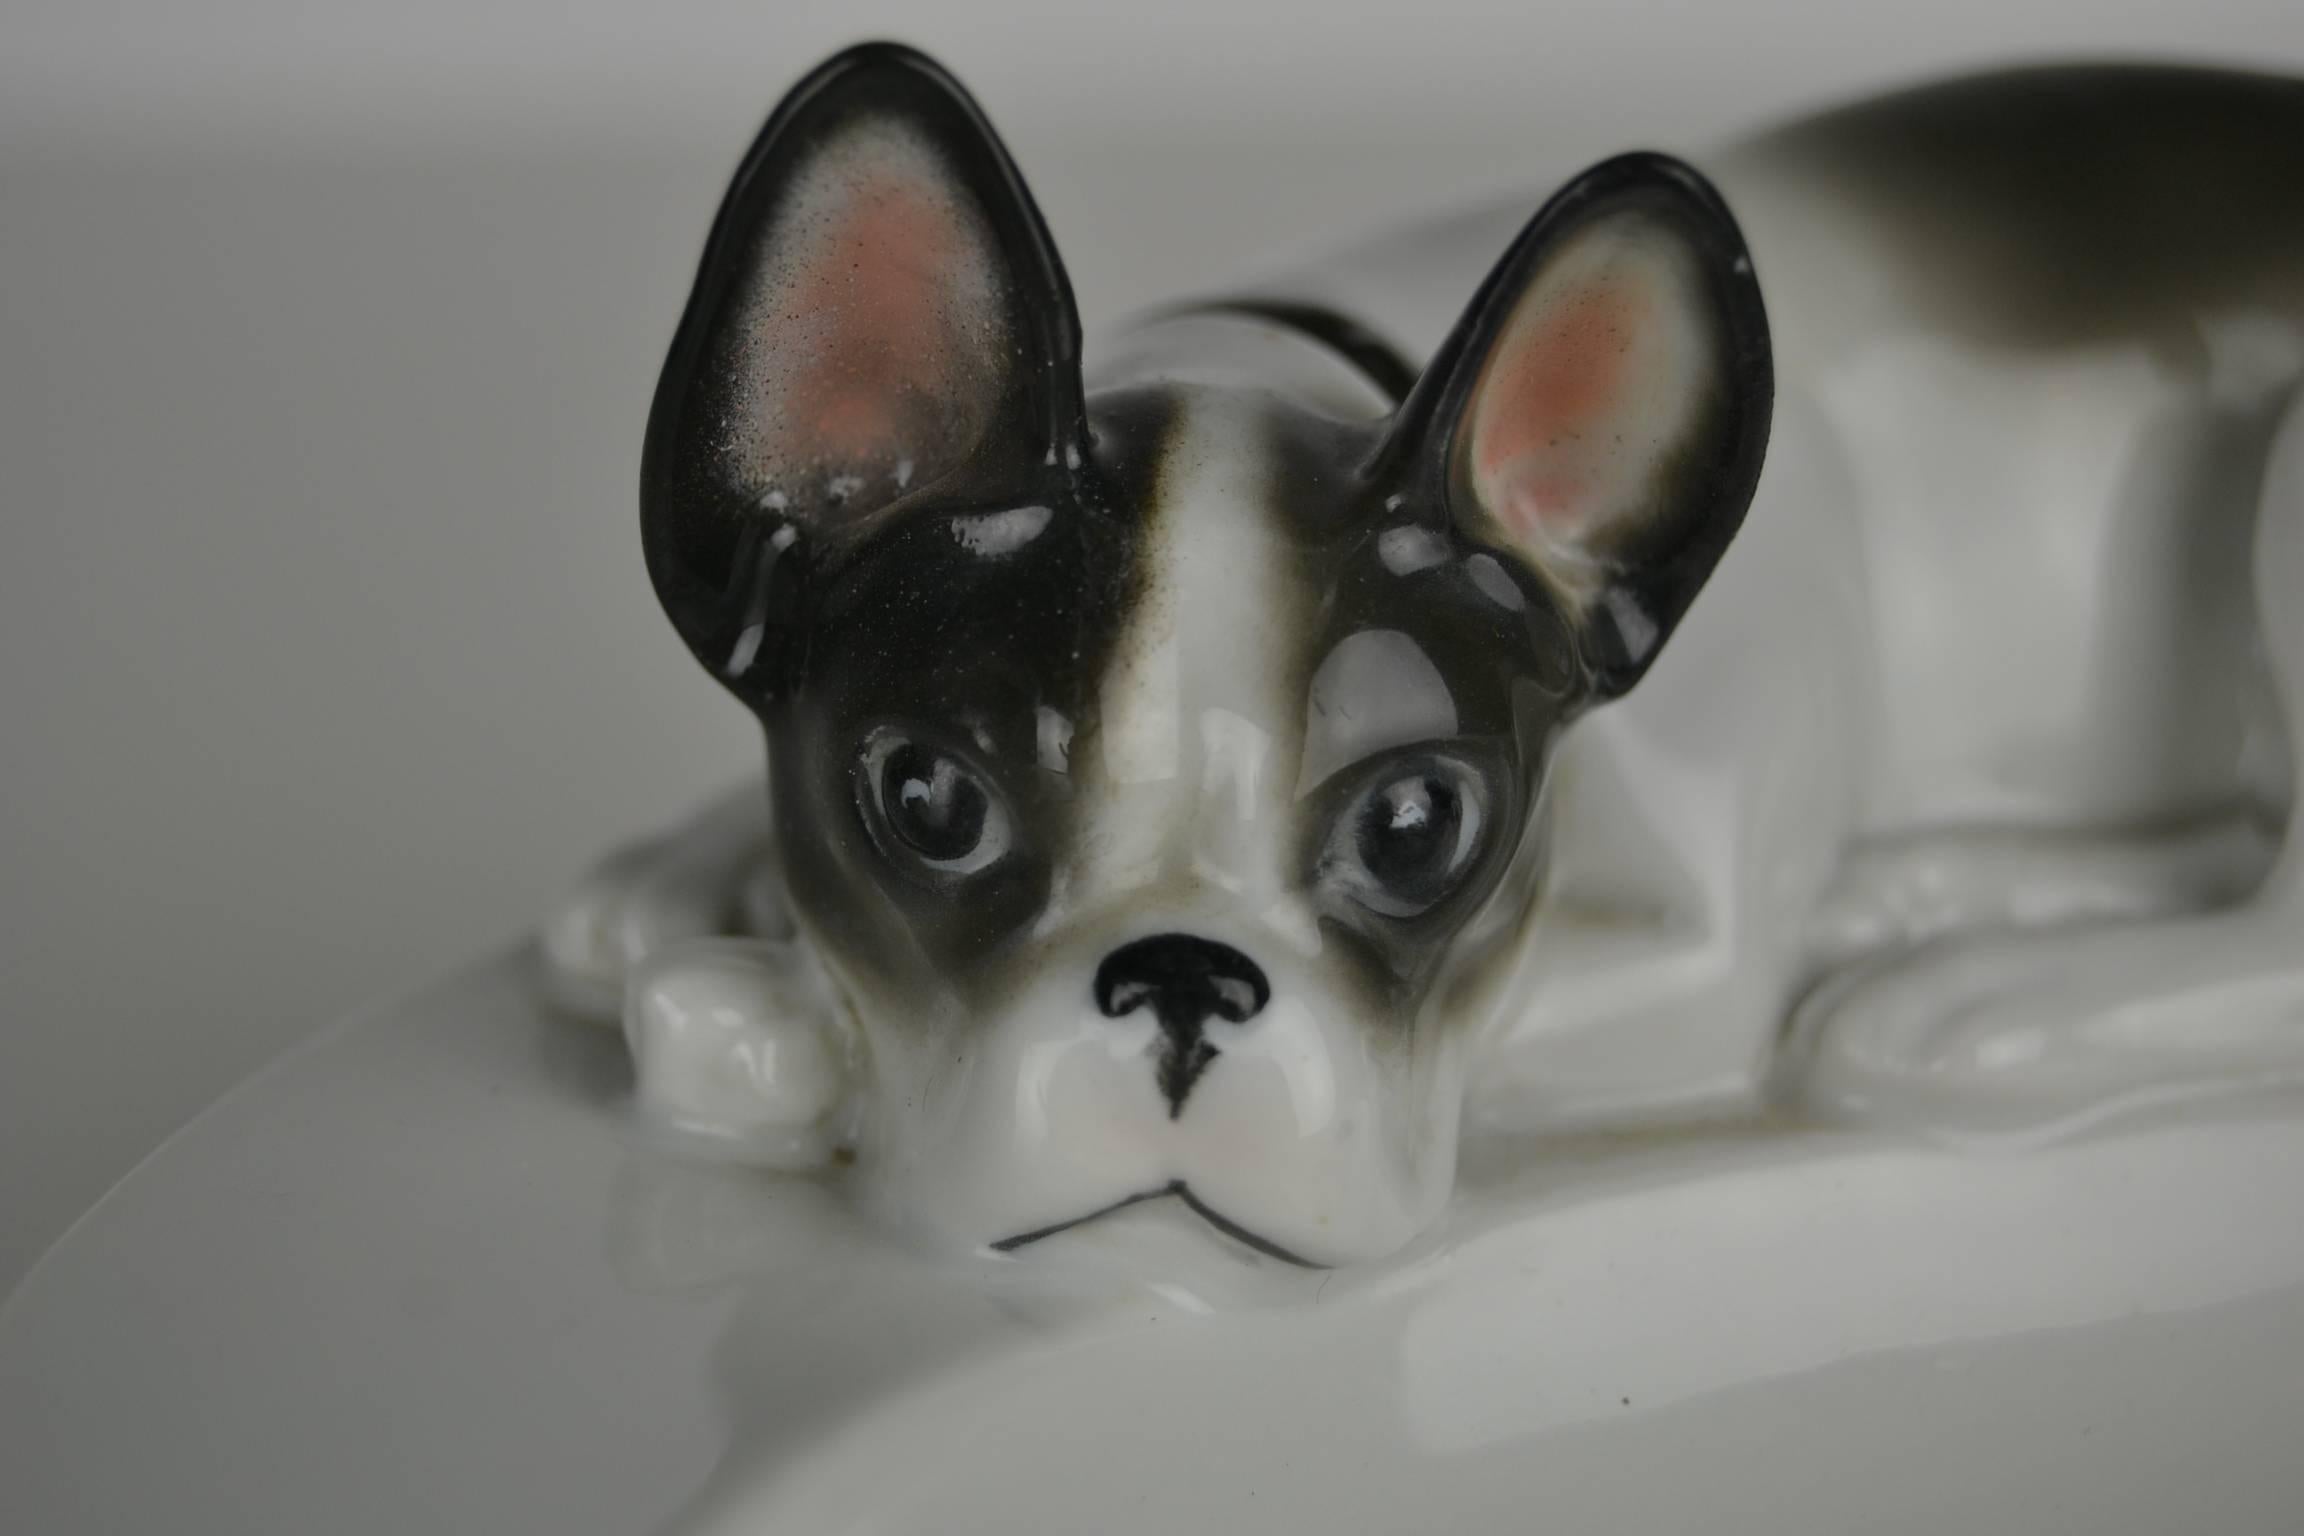 White Porcelain Ashtray with a lying French bulldog on top. 
This Art Deco Ashtray dates from the 1930s and was made in Germany by the Porcelain and Faience Factory Pfeffer Gotha. This ashtray is stamped and has a number 4948.
According to the stamp